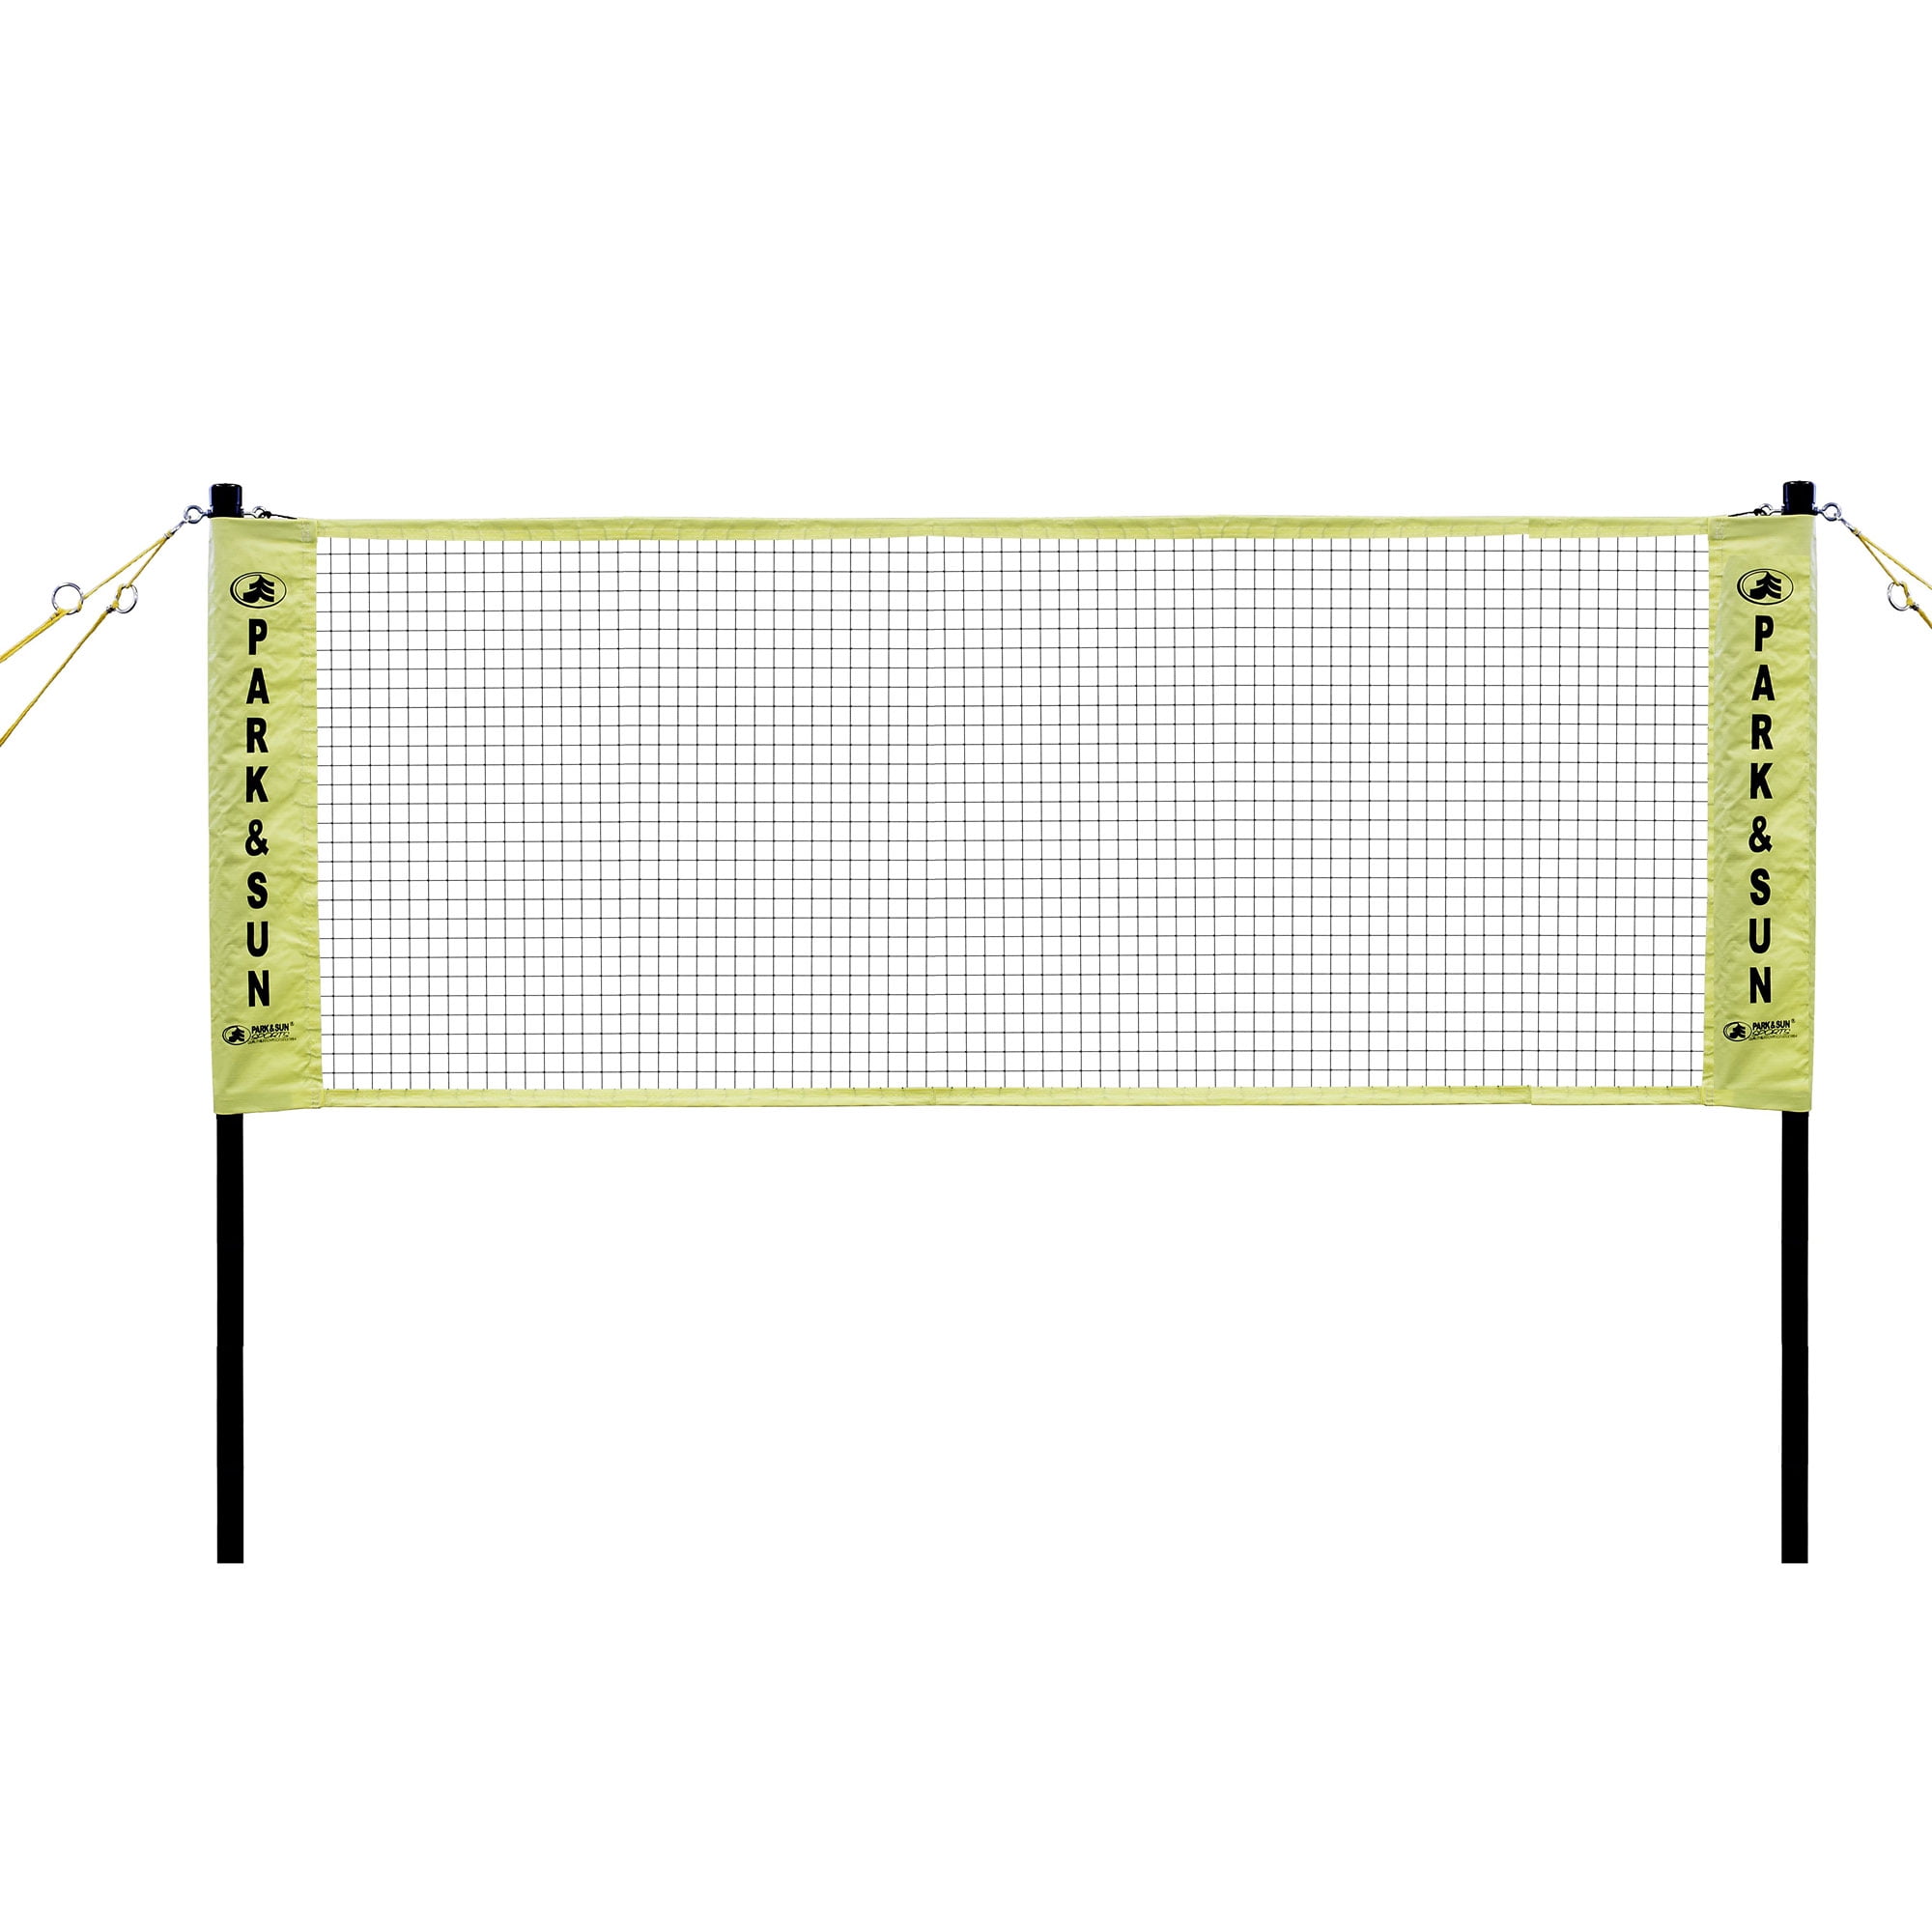 Park & Sun Sports Portable Indoor/Outdoor Badminton Net with Rope Cable Top, 